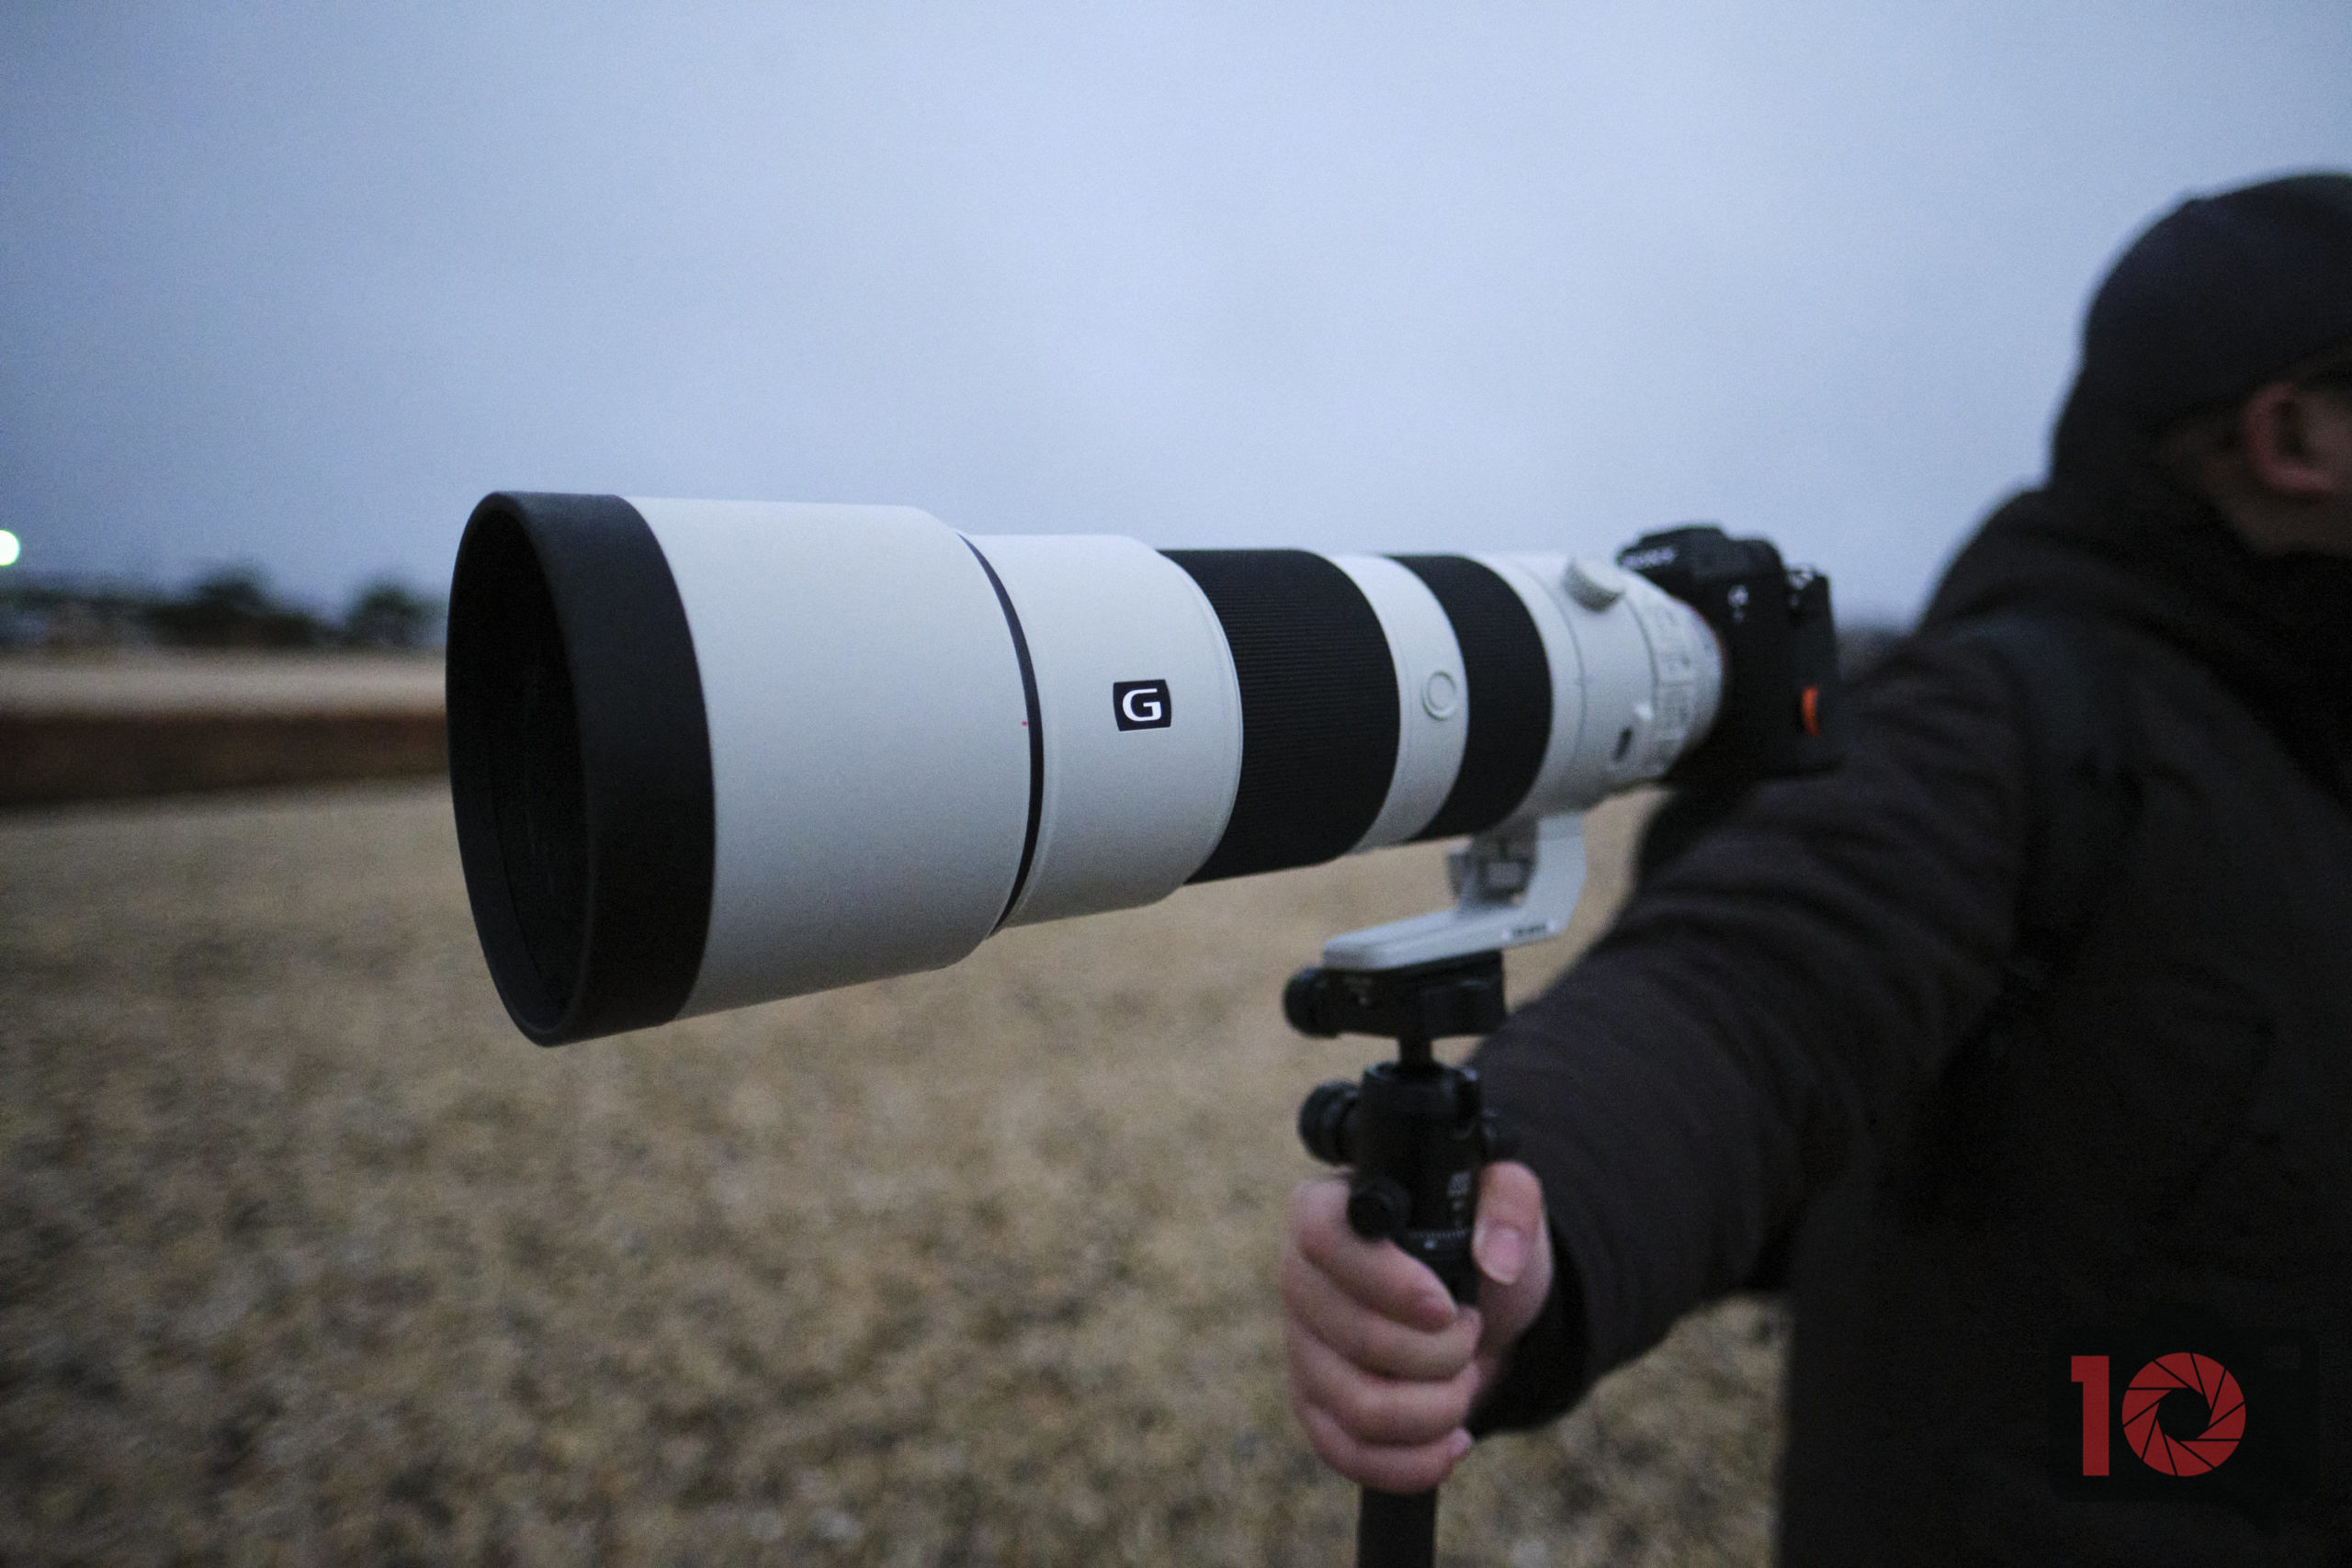 Join Us, We’re Talking About Telephoto Lenses for Landscape Photography